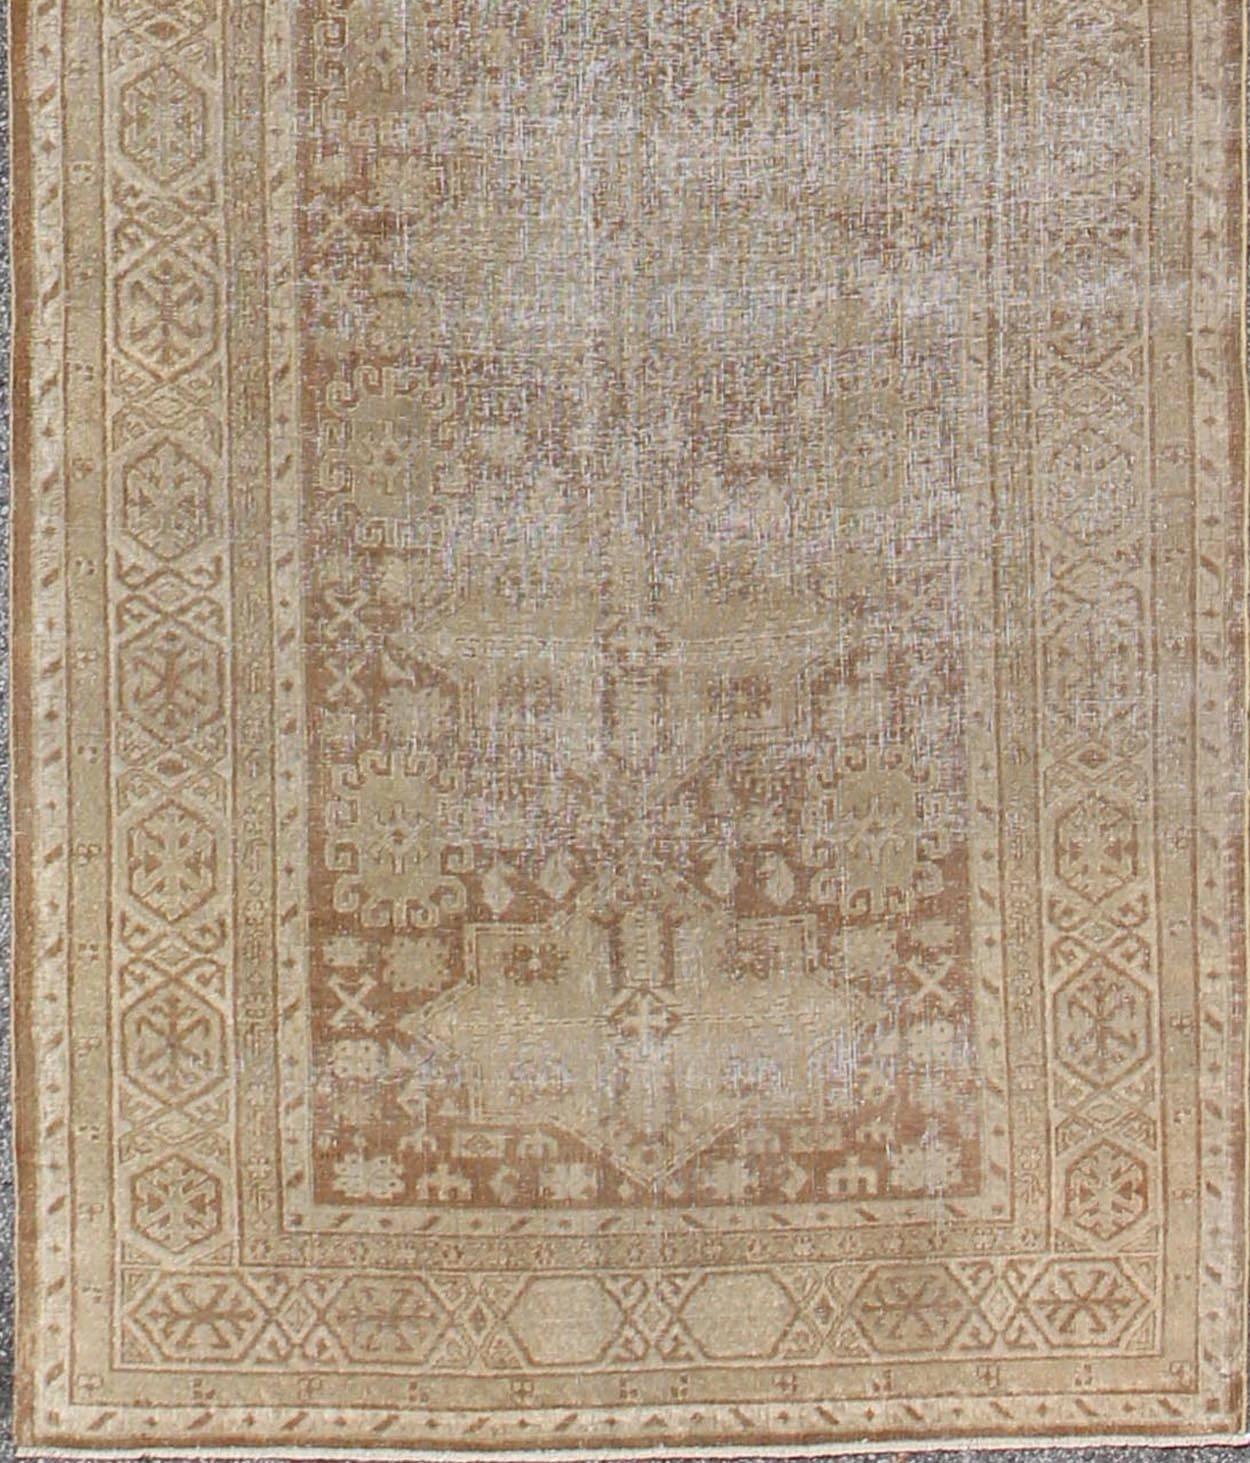 Antique medallion design long Amritsar runner in nude, taupe, camel, rug 16-1108, country of origin / type: Turkey / Amritsar, circa 1940

This fabulous, very long, vintage Amritsar runner displays a medallion design with geometric and tribal